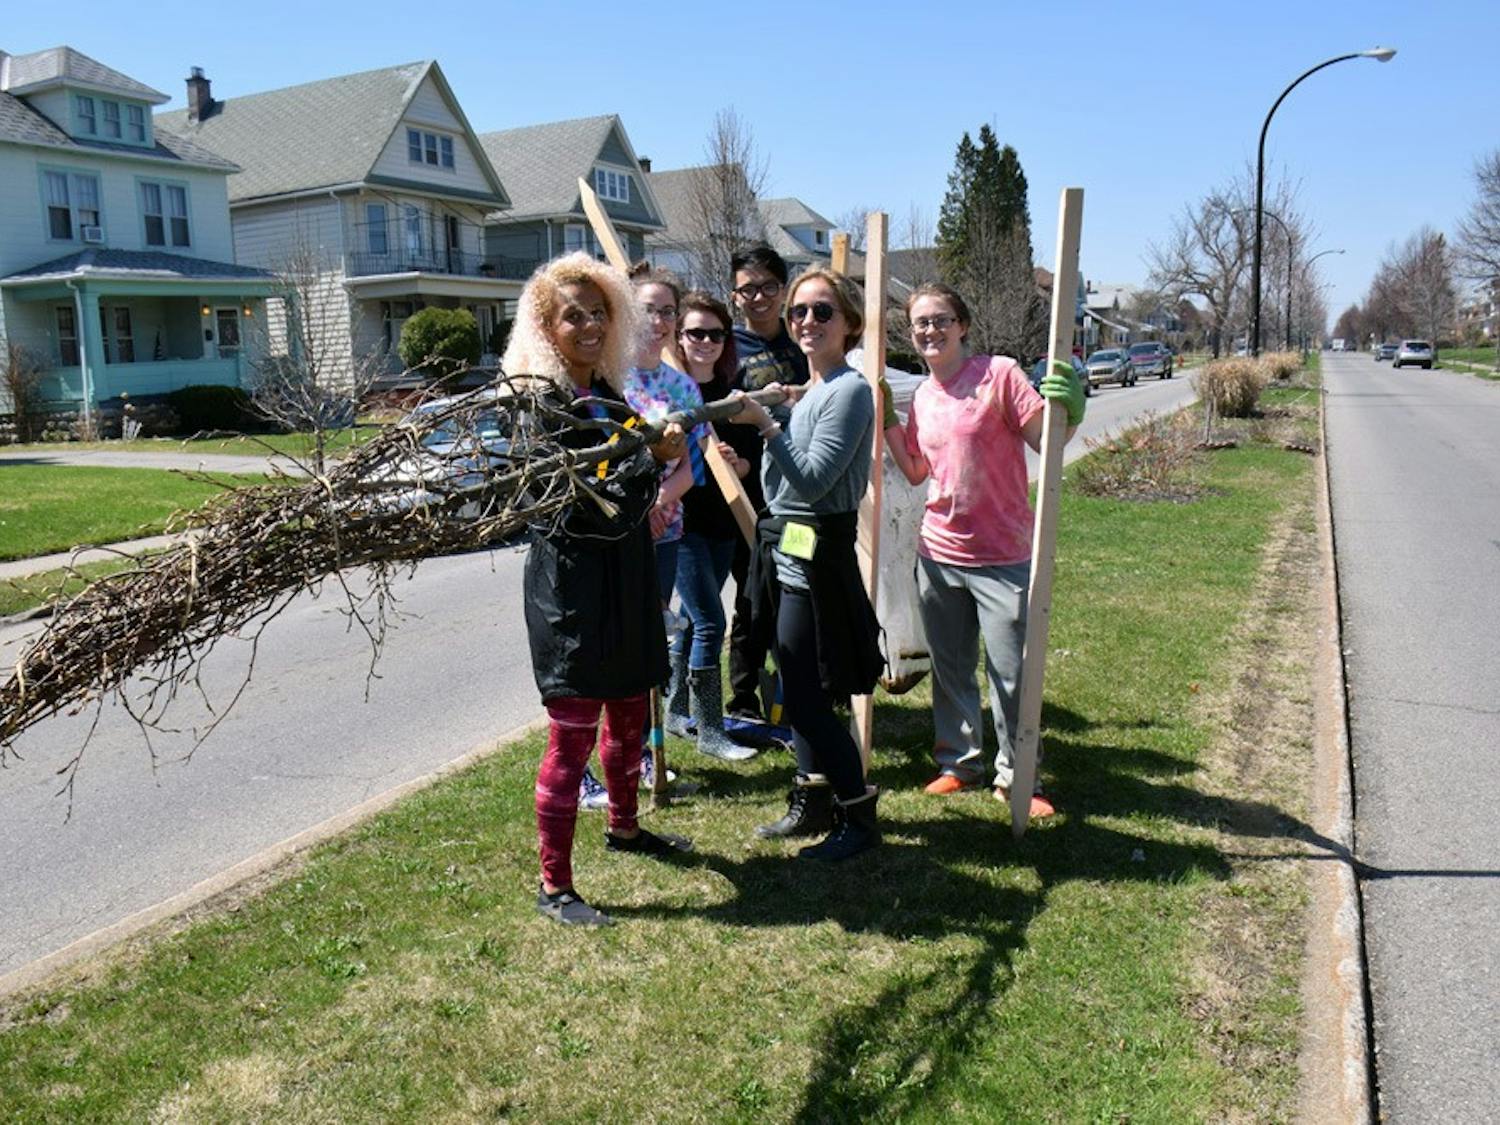 (From left to right) Dominique Case, Nicole O’Heron, Emily Snyder, Brian De Guzman, Julia Schoonover, and Courtney Miller plant trees in the University Heights Saturday as a part of ReTree the District in the spring of 2015.&nbsp;